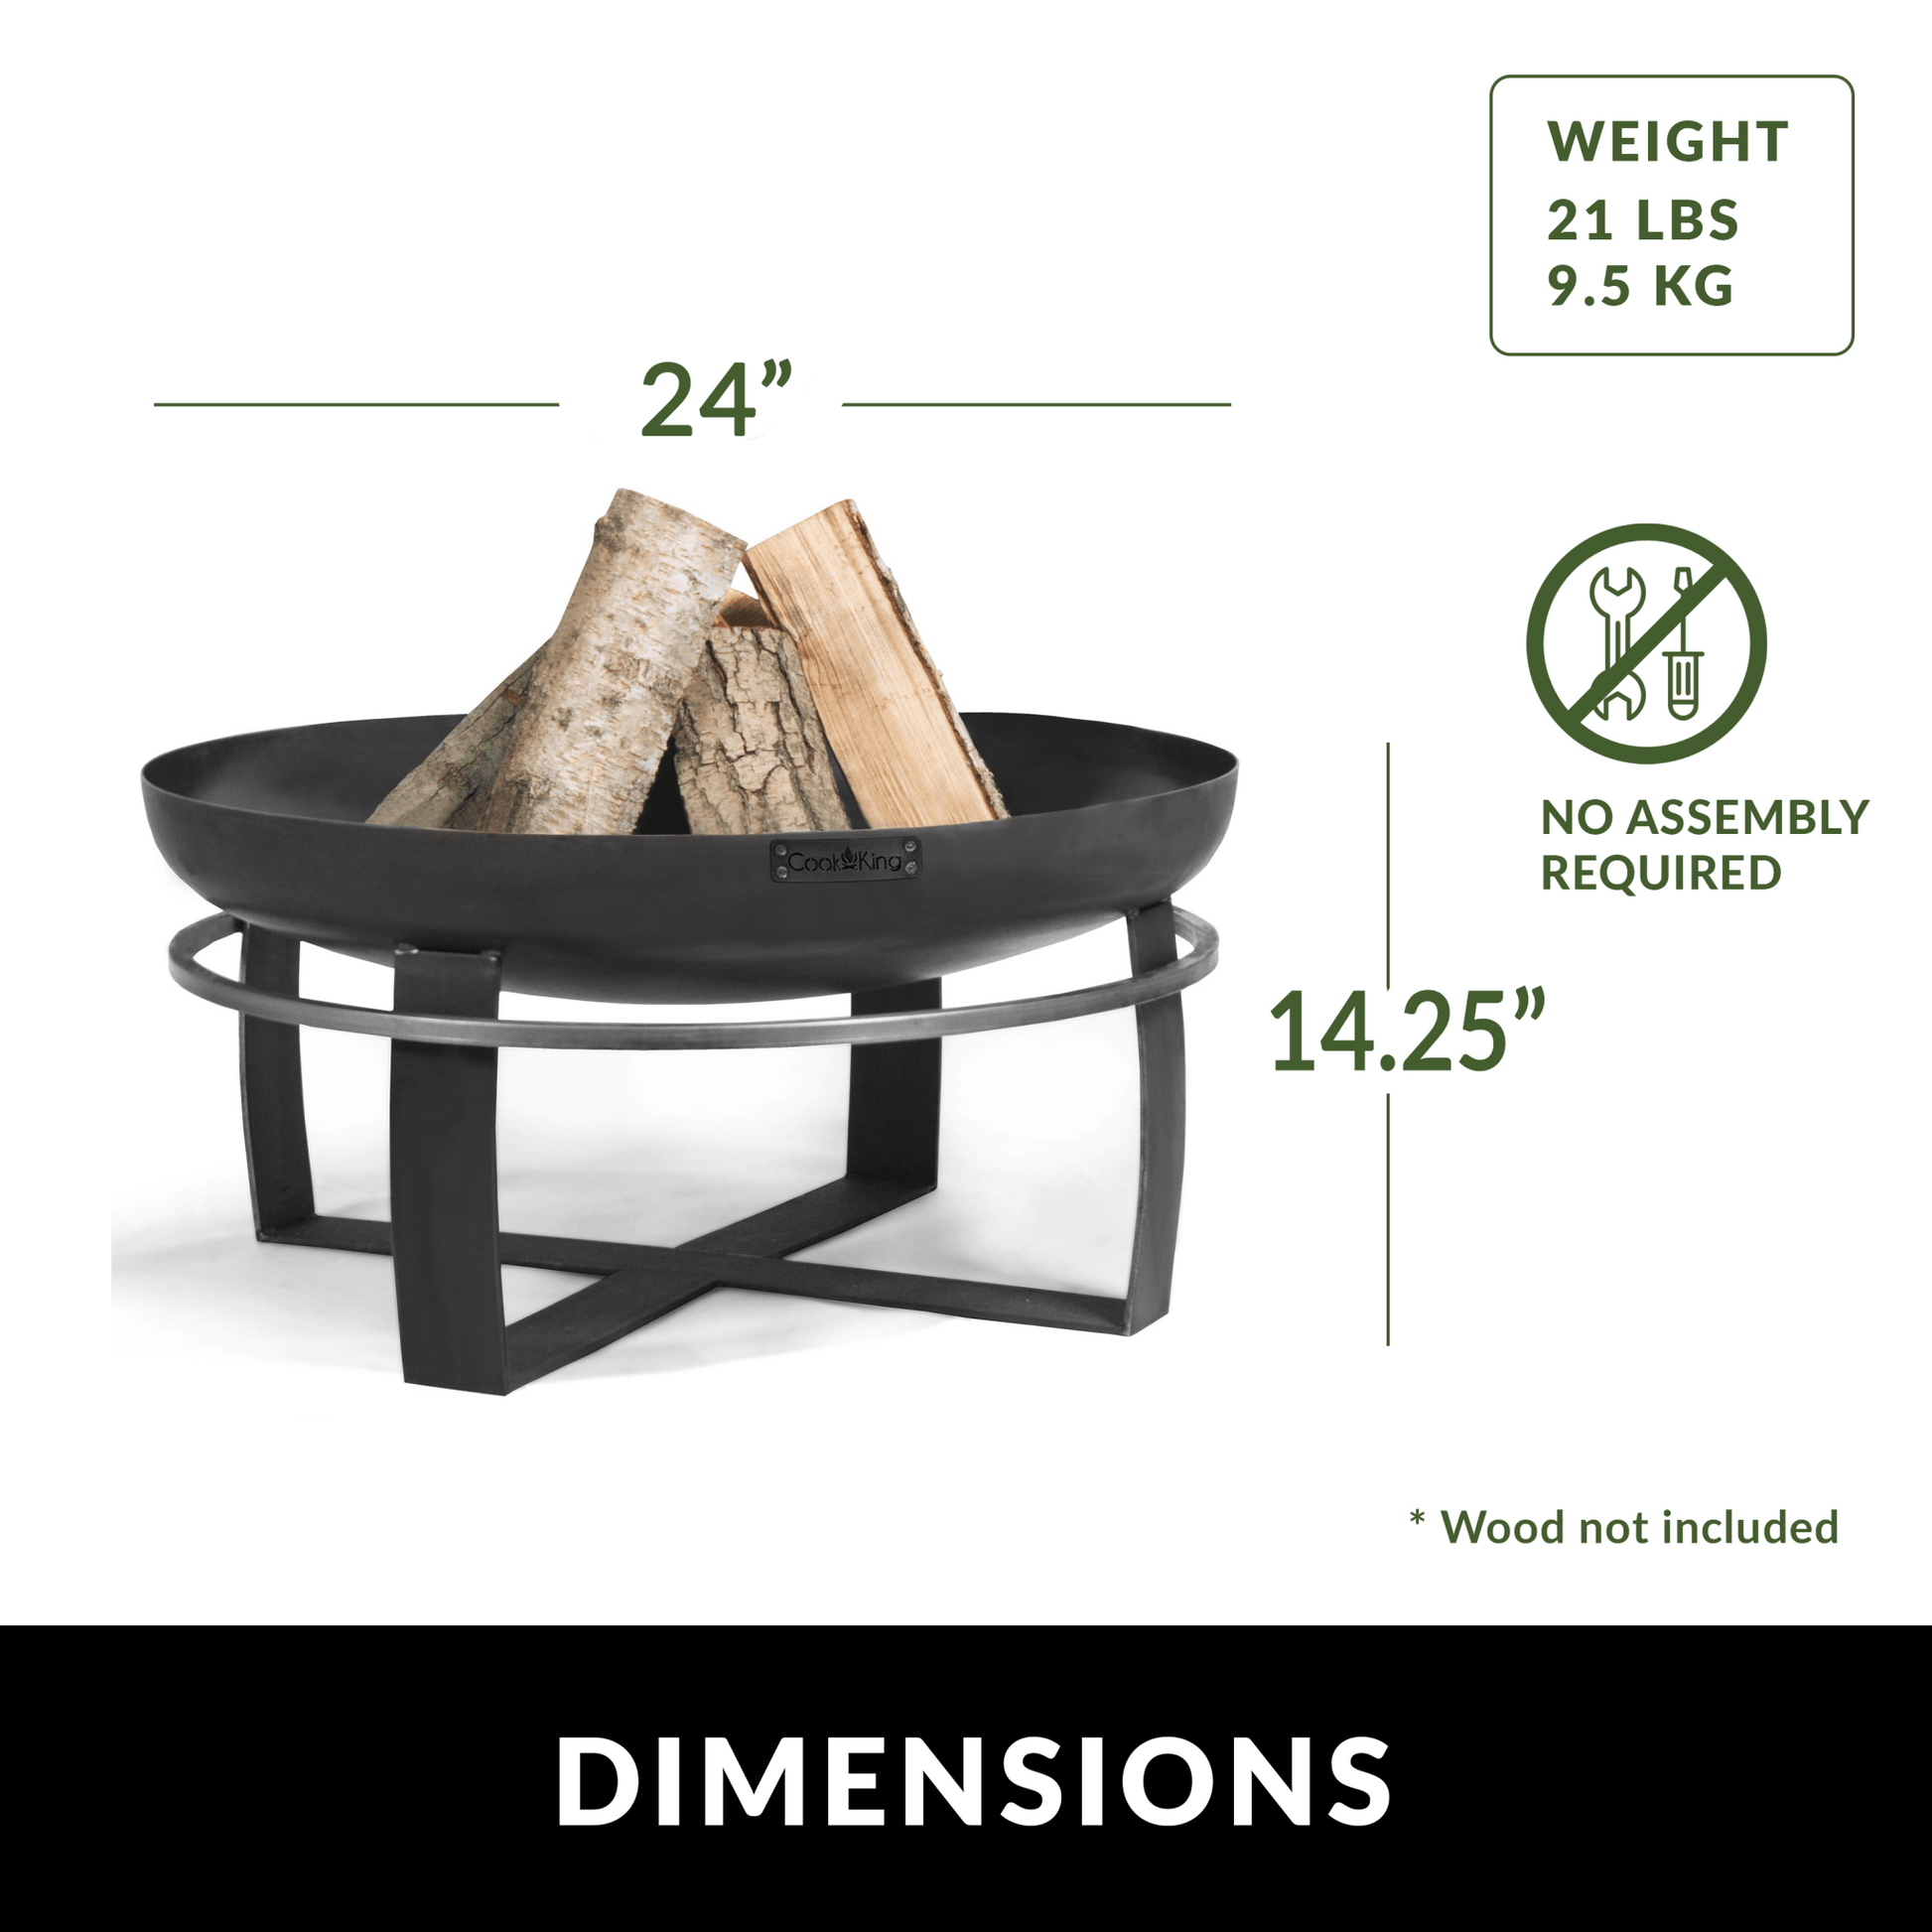 Viking 24" Fire Pit - Good Directions